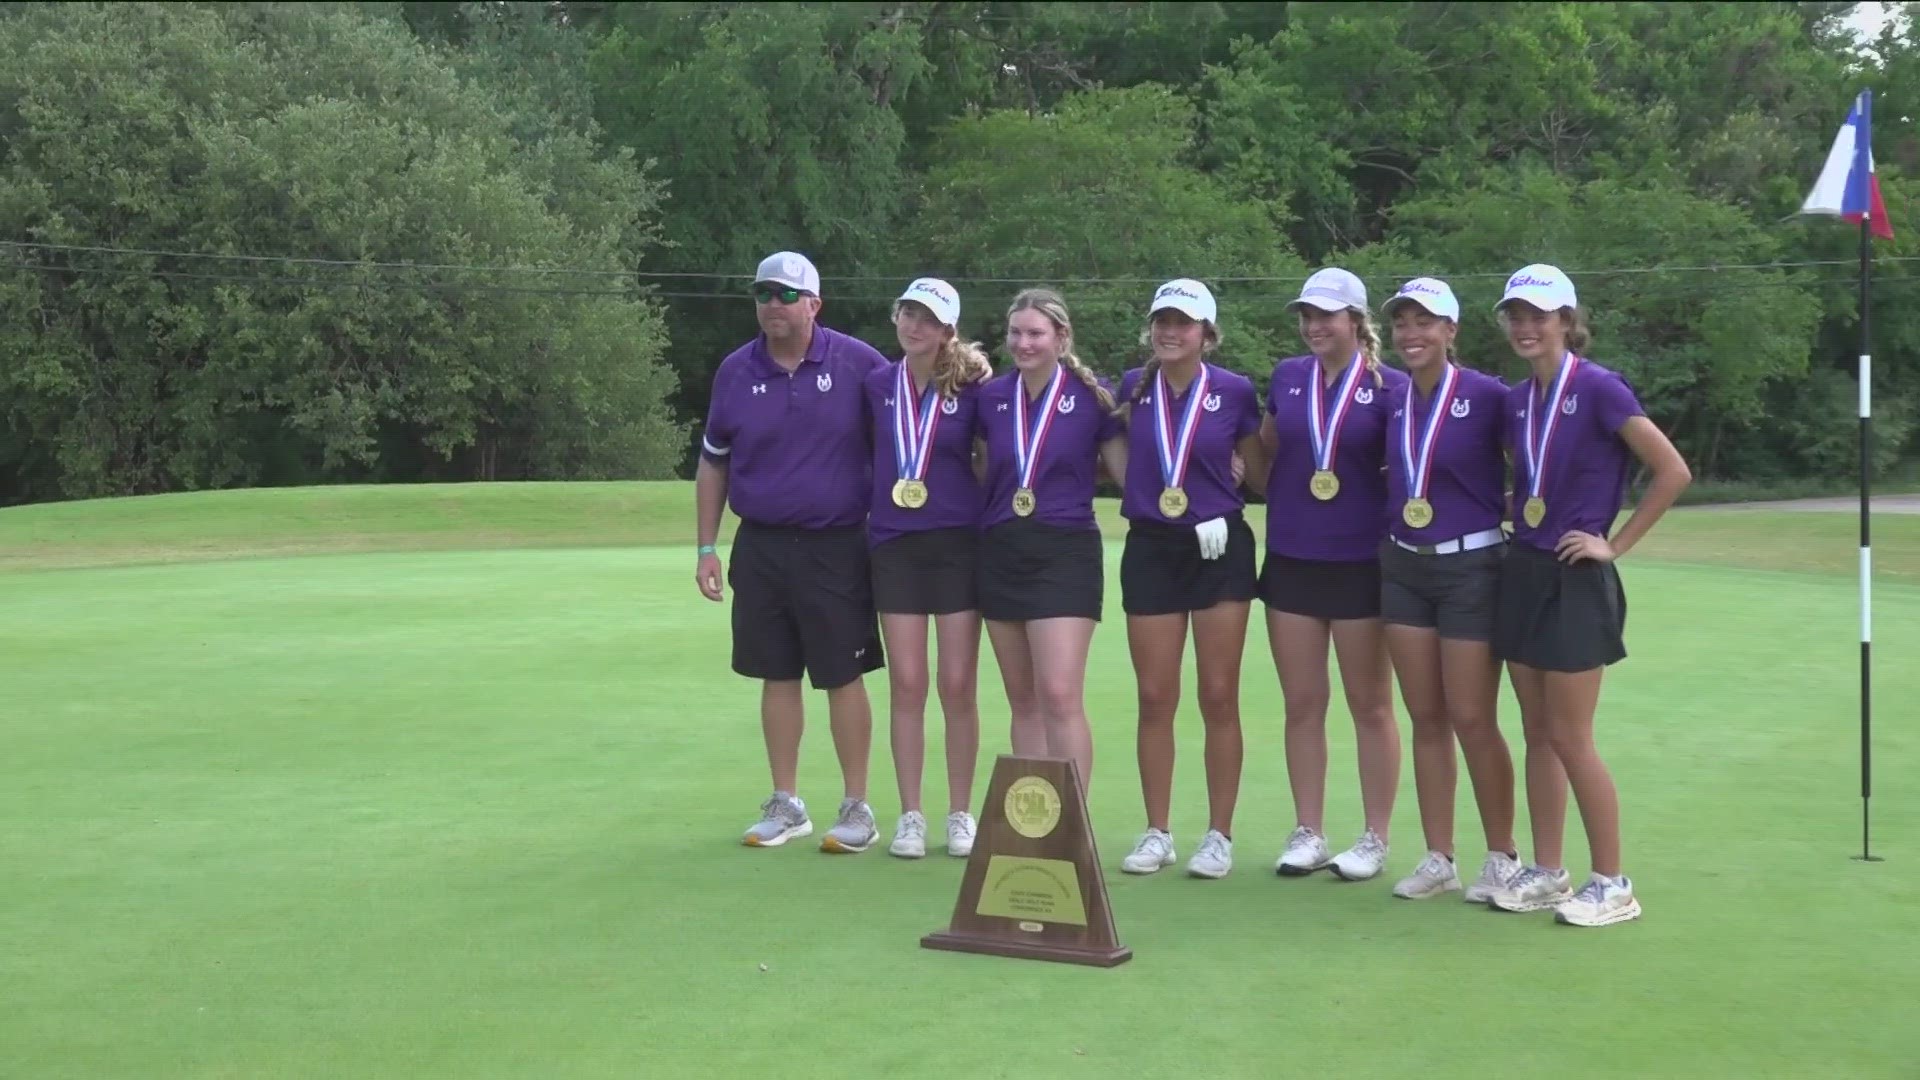 In 2A, Mason won gold in dominant fashion. The girls found a way to win by 67strokes in a two-day event.